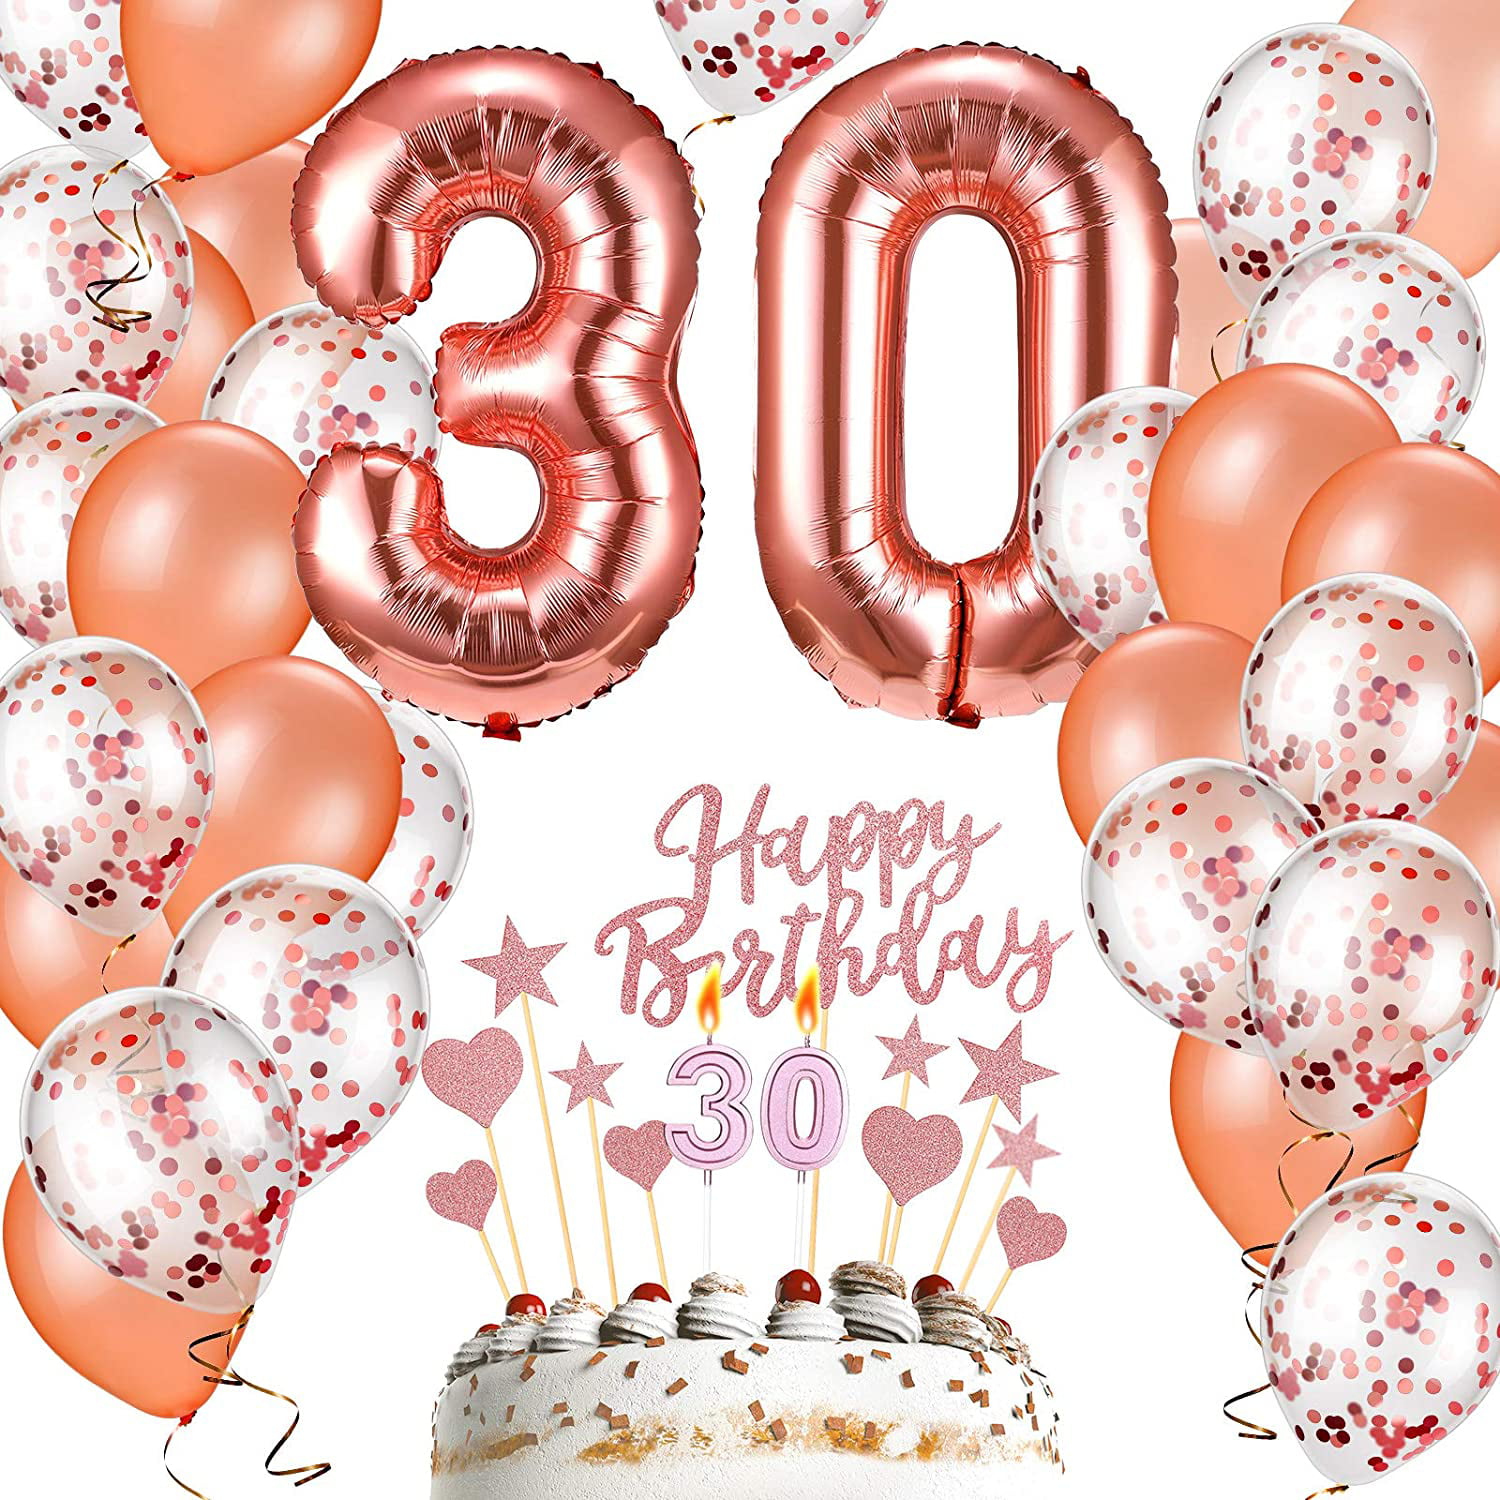 Details about   Happy 40th Birthday Milestone FORTY 18" Foil Mylar Party Balloon Decorations 